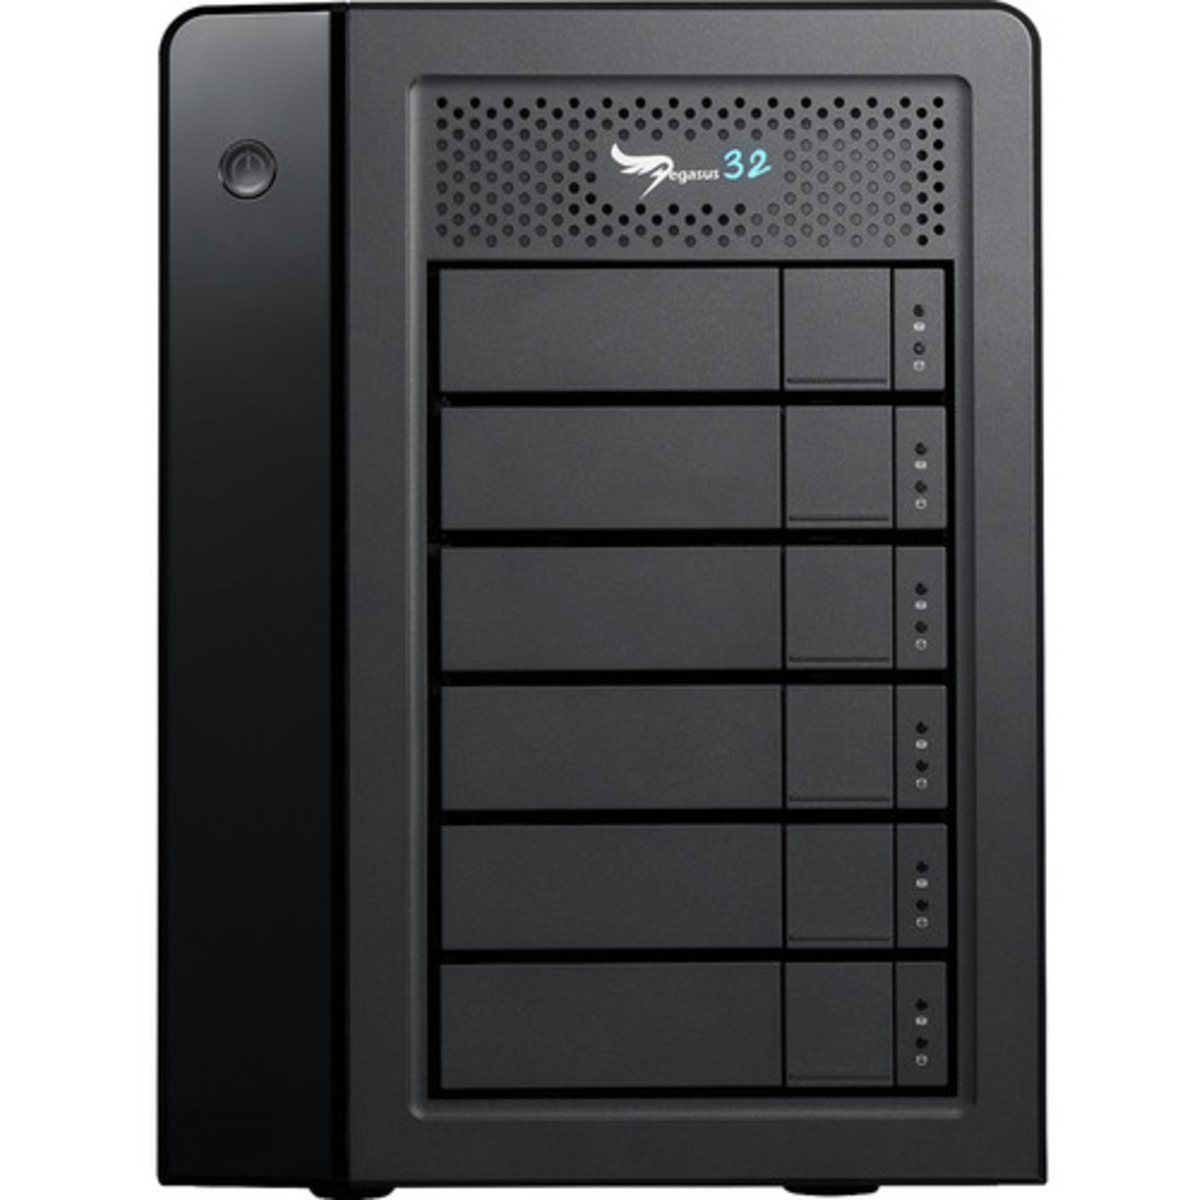 buy $4486 Promise Technology Pegasus32 R6 Thunderbolt 3 96tb Desktop DAS - Direct Attached Storage Device 6x16000gb Toshiba Enterprise Capacity MG08ACA16TE 3.5 7200rpm SATA 6Gb/s HDD ENTERPRISE Class Drives Installed - Burn-In Tested - nas headquarters buy network attached storage server device das new raid-5 free shipping usa Pegasus32 R6 Thunderbolt 3